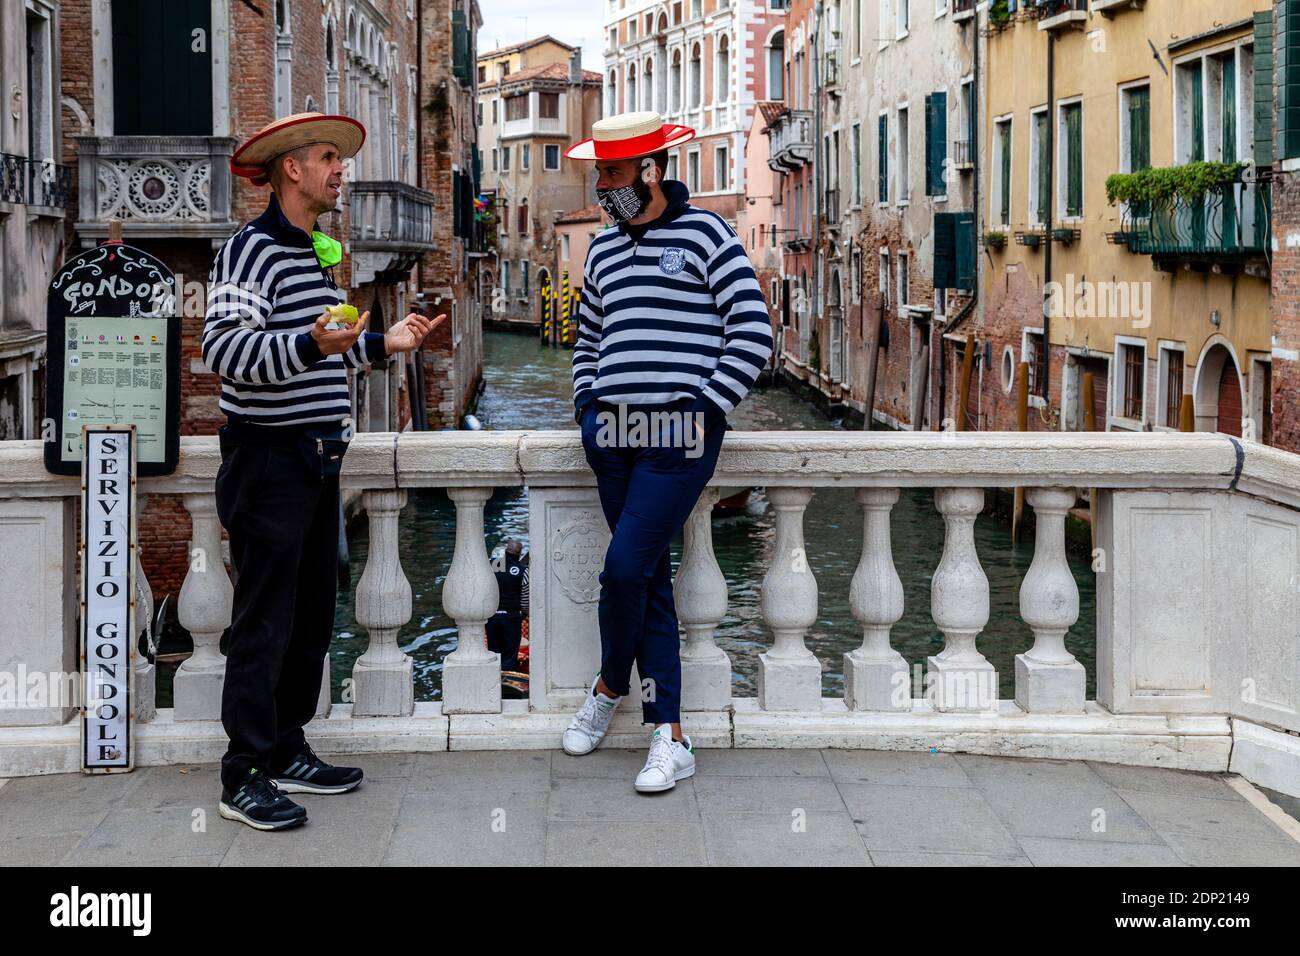 Two Gondoliers Wait For Customers, Venice, Italy. Stock Photo